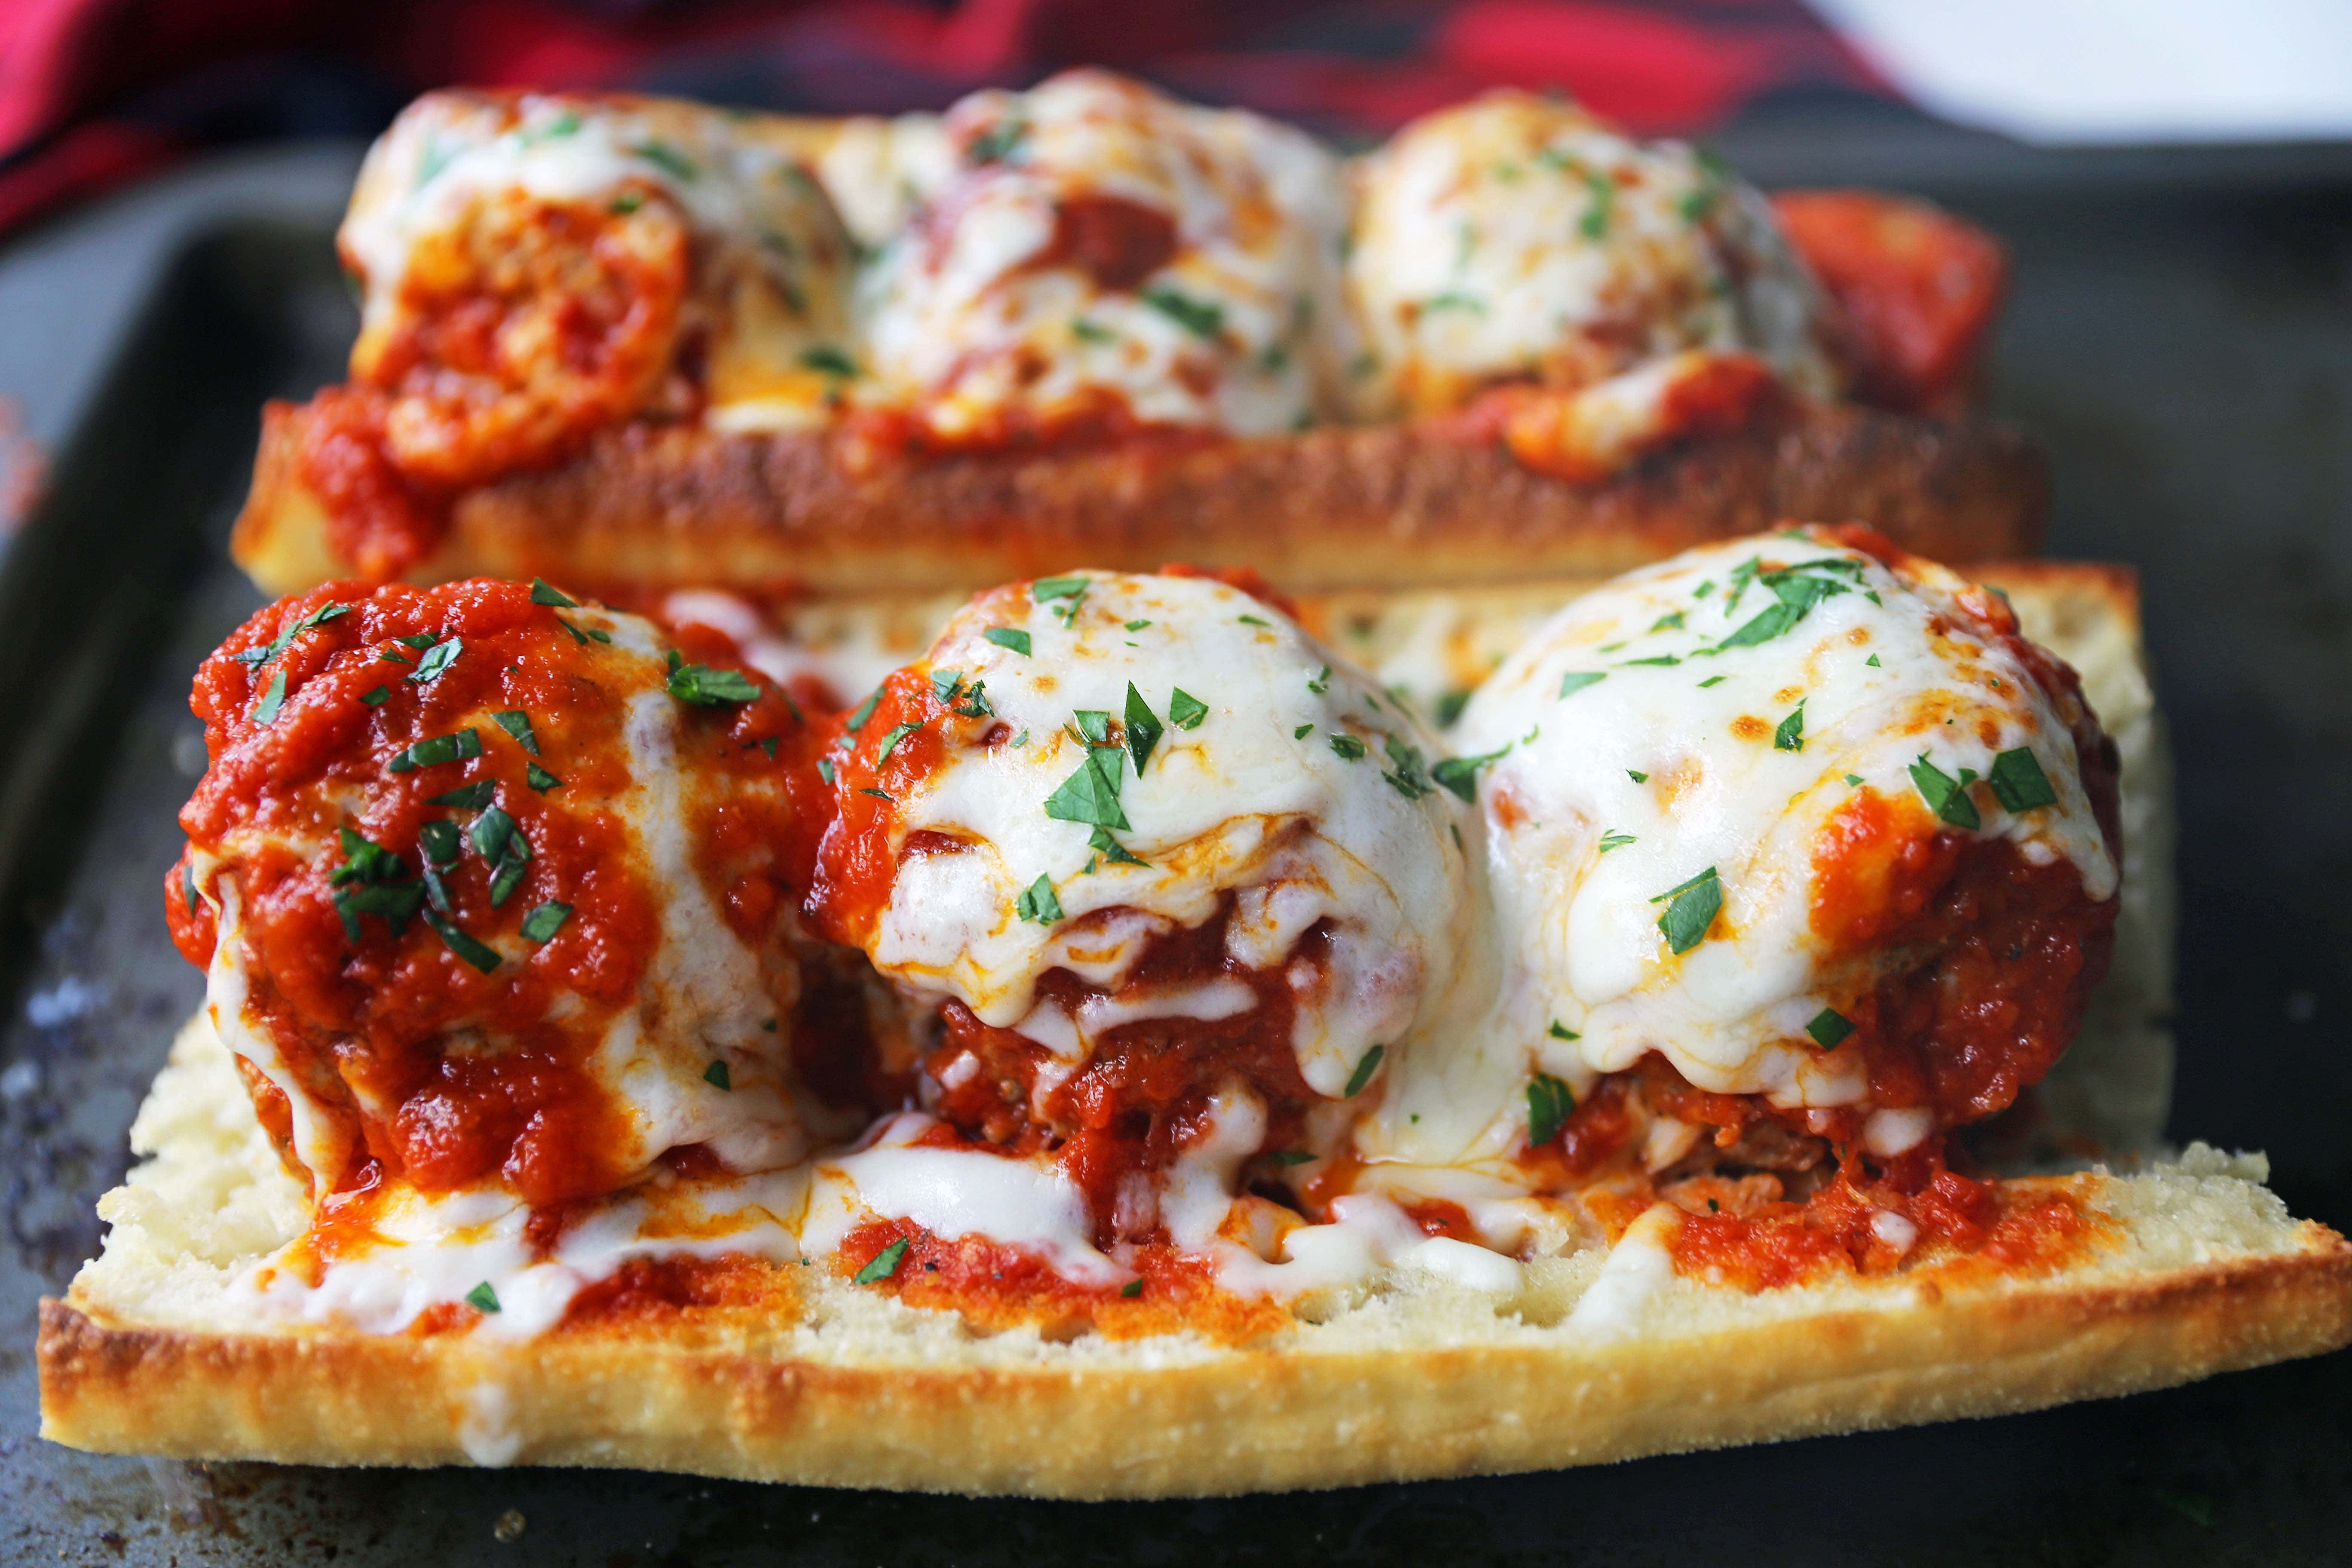 Italian Meatball Subs. Homemade beef parmesan meatballs in a fresh marinara sauce topped with melted mozzarella cheese all on toasted bread. The best meatball sub recipe! www.modernhoney.com #meatballs #meatball #meatballsub